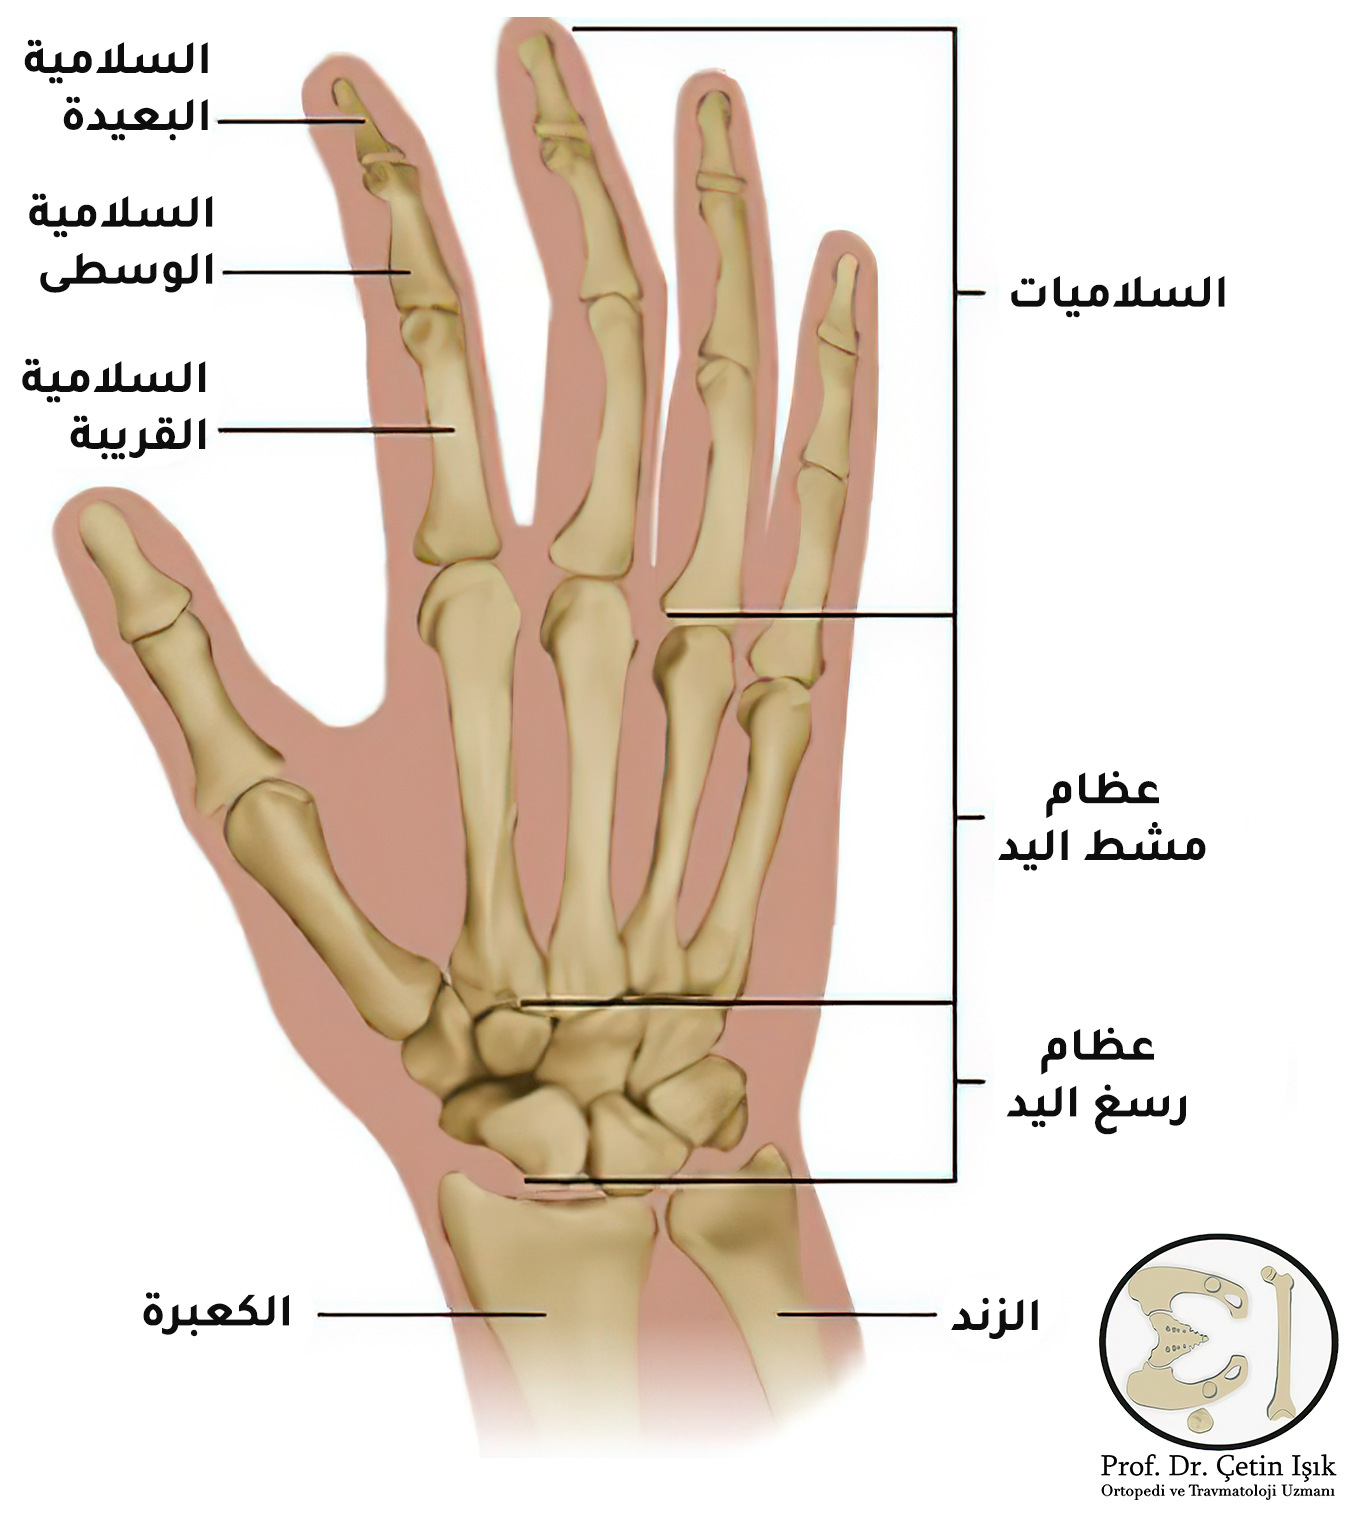 The components of the hand and fingers are the phalanges, metatarsals, and carpal bones